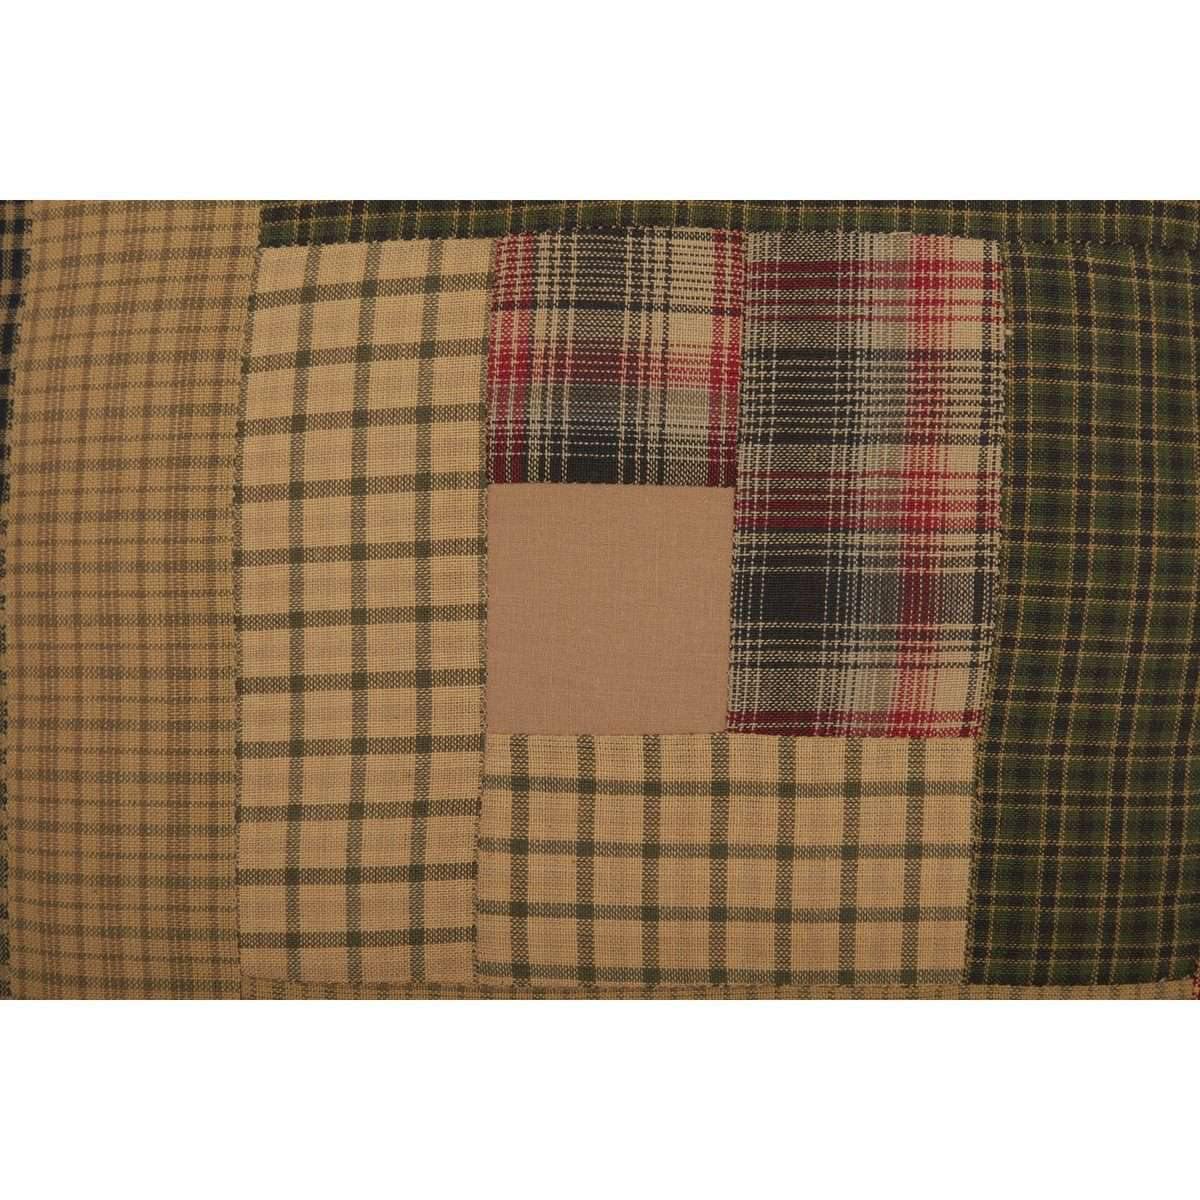 Tea Cabin Patch Pillow 12x12 VHC Brands zoom